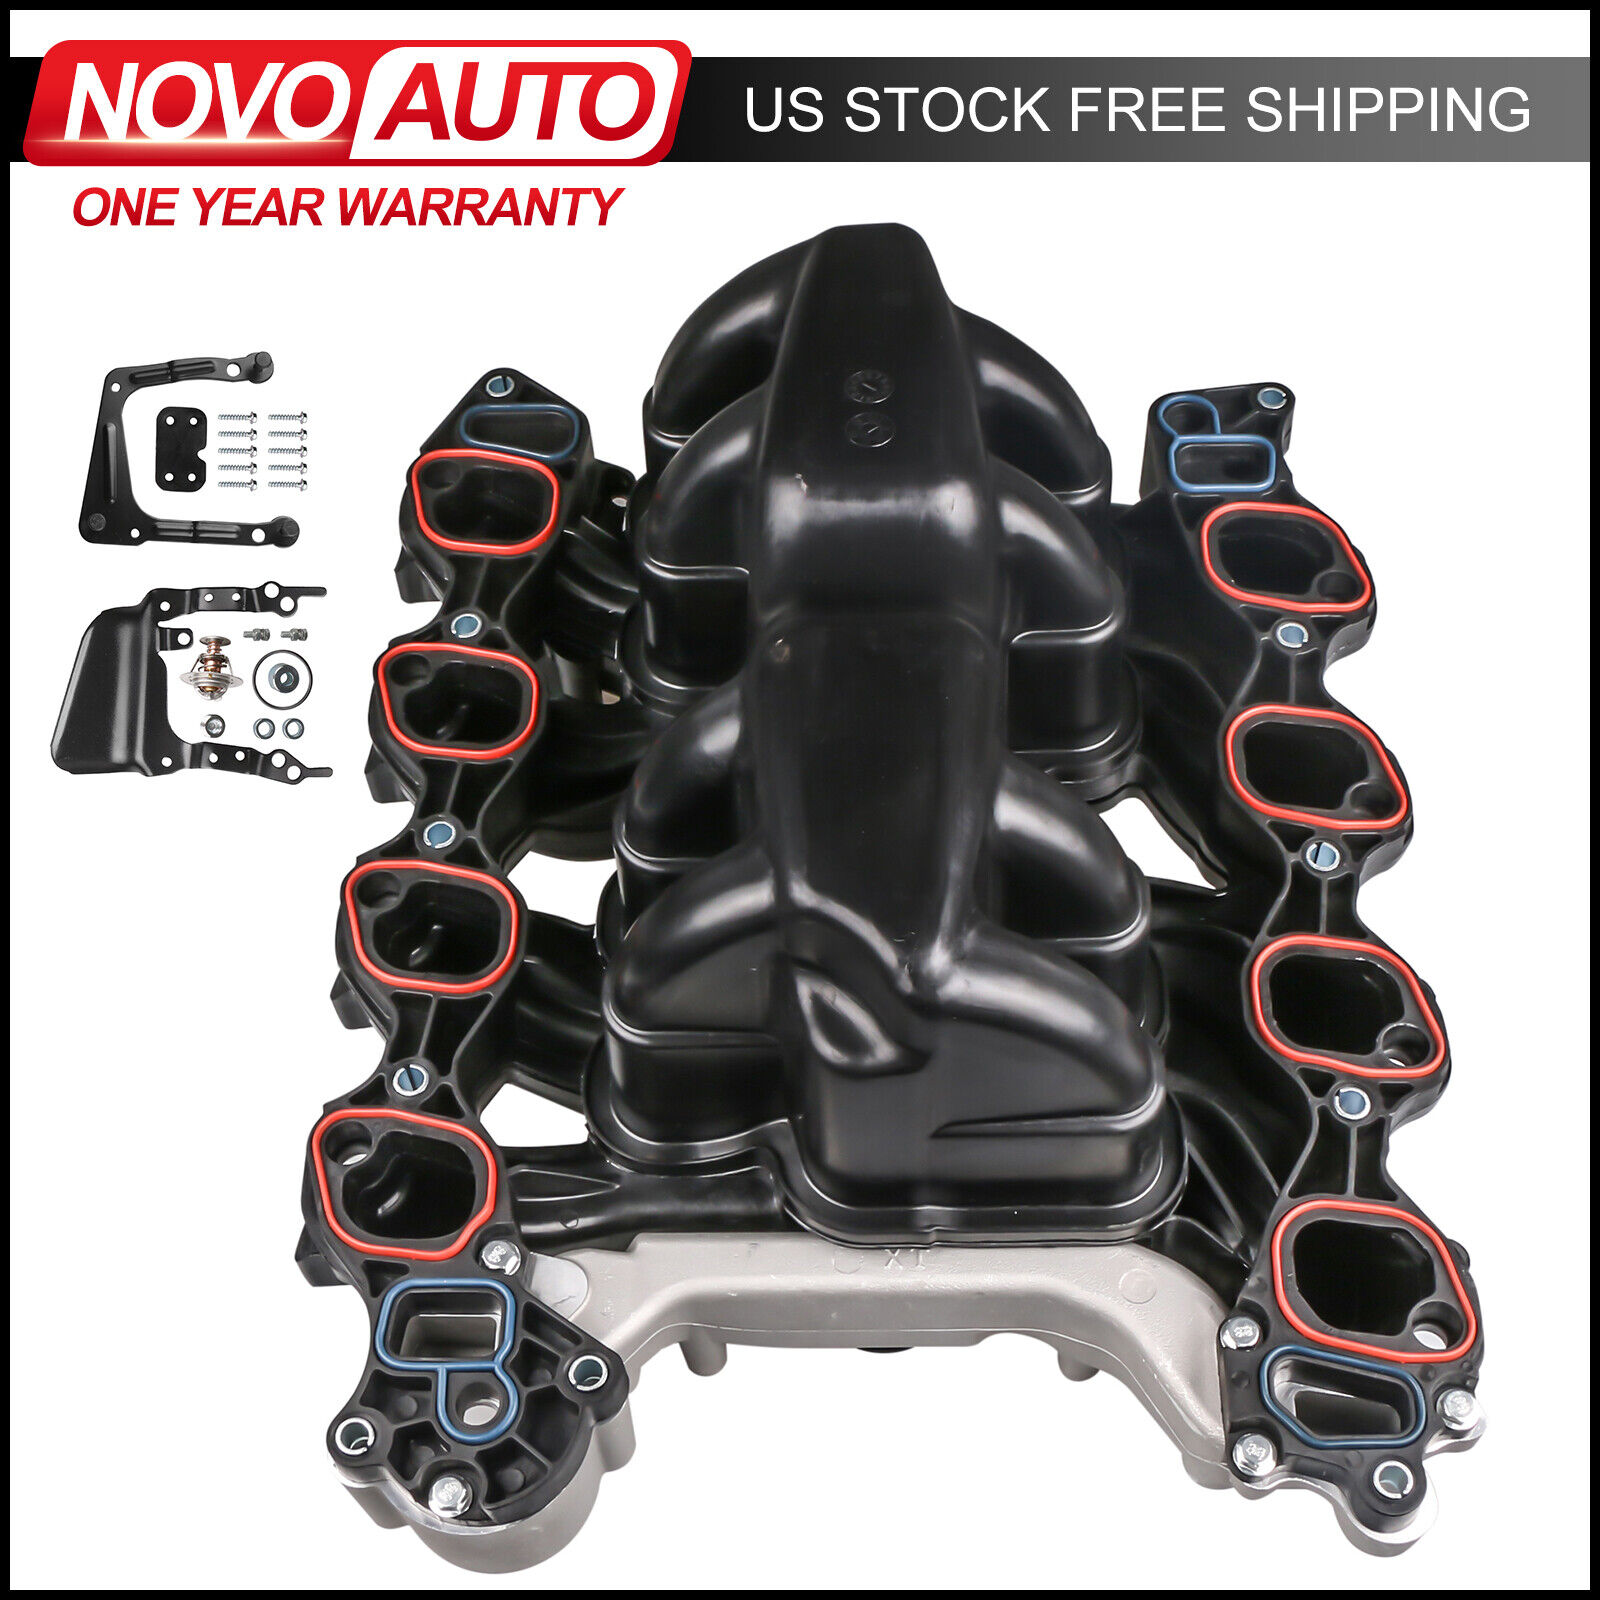 Upper Intake Manifold For Mustang Crown Victoria Grand Marquis Town Car V8 4.6L